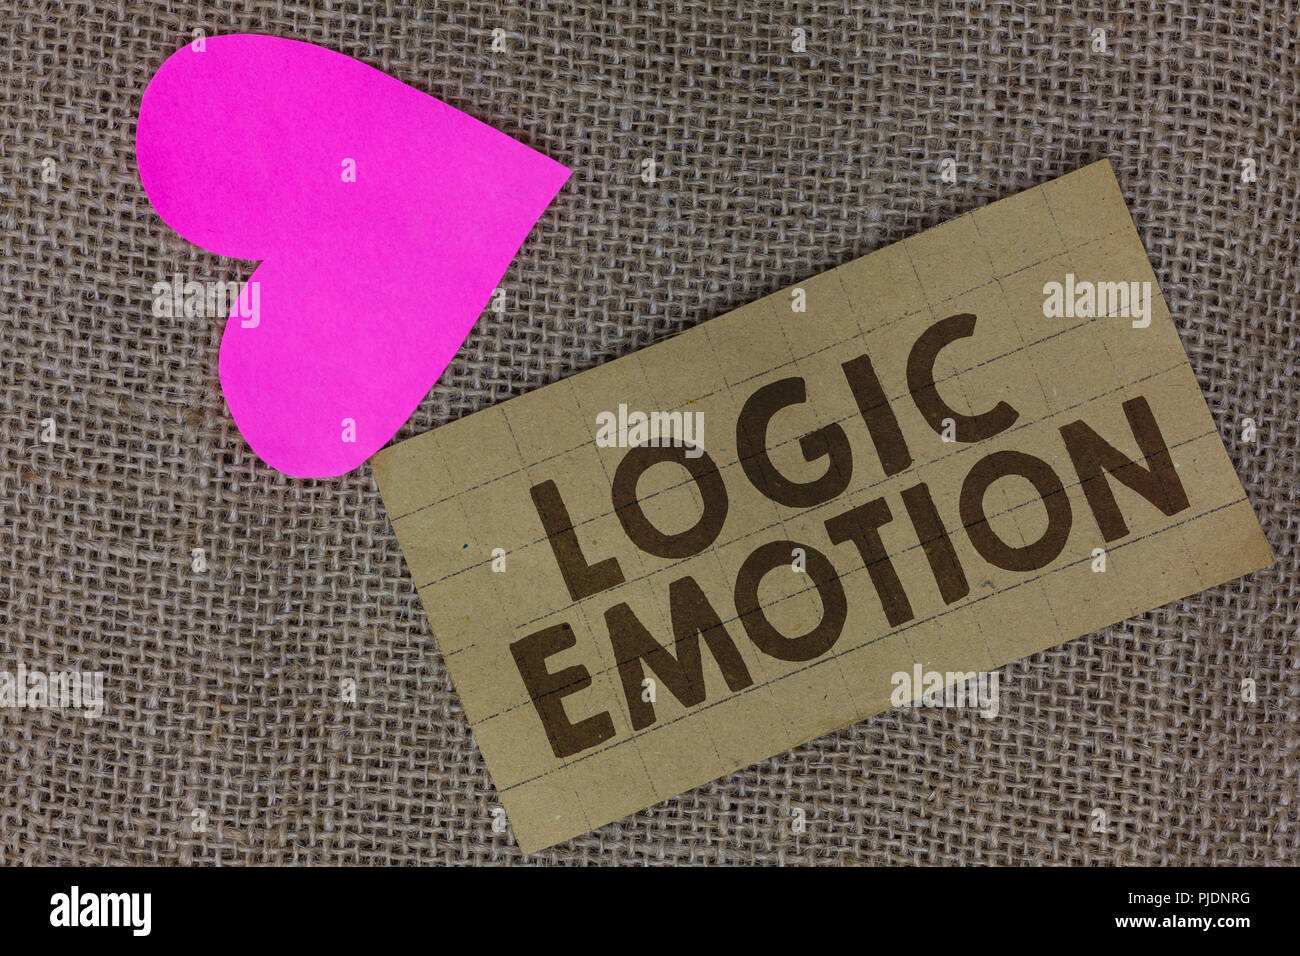 Word writing text Logic Emotion. Business concept for Unpleasant Feelings turned to Self Respect Reasonable Mind Piece squared paperboard paper heart  Stock Photo